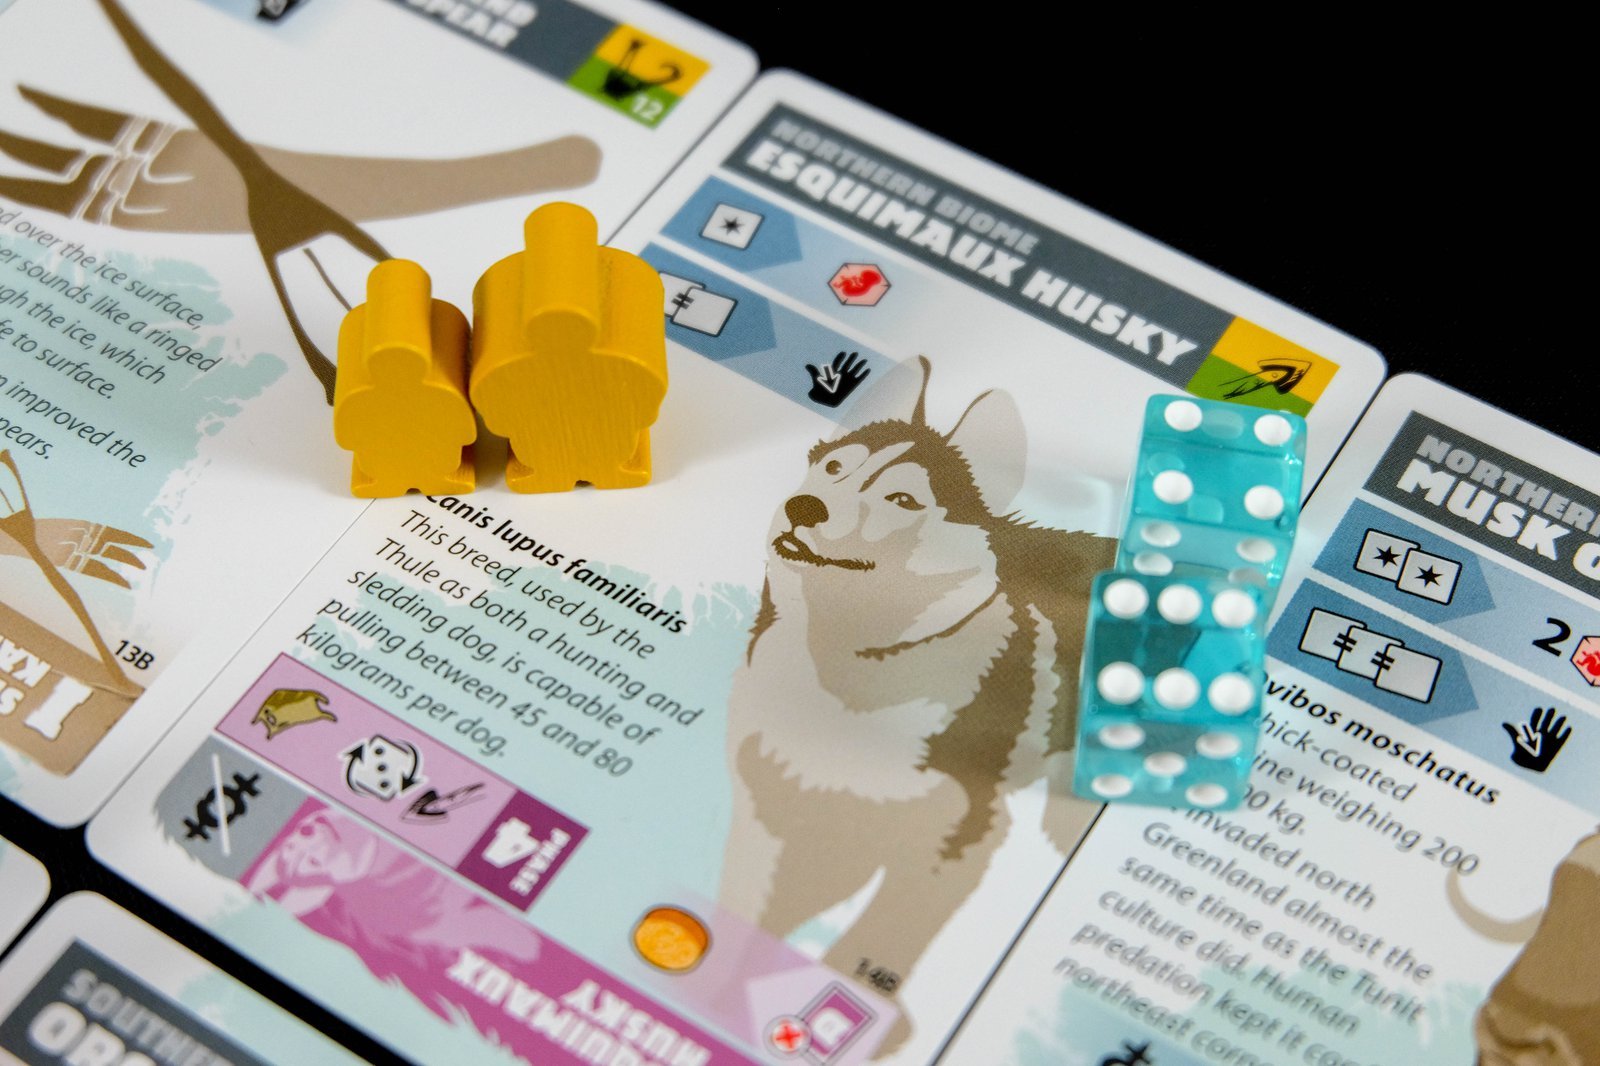 Greenland board game (3rd edition)  - Expanded view of dice, custom meeples, and a biome card featuring the Esquimaux Husky